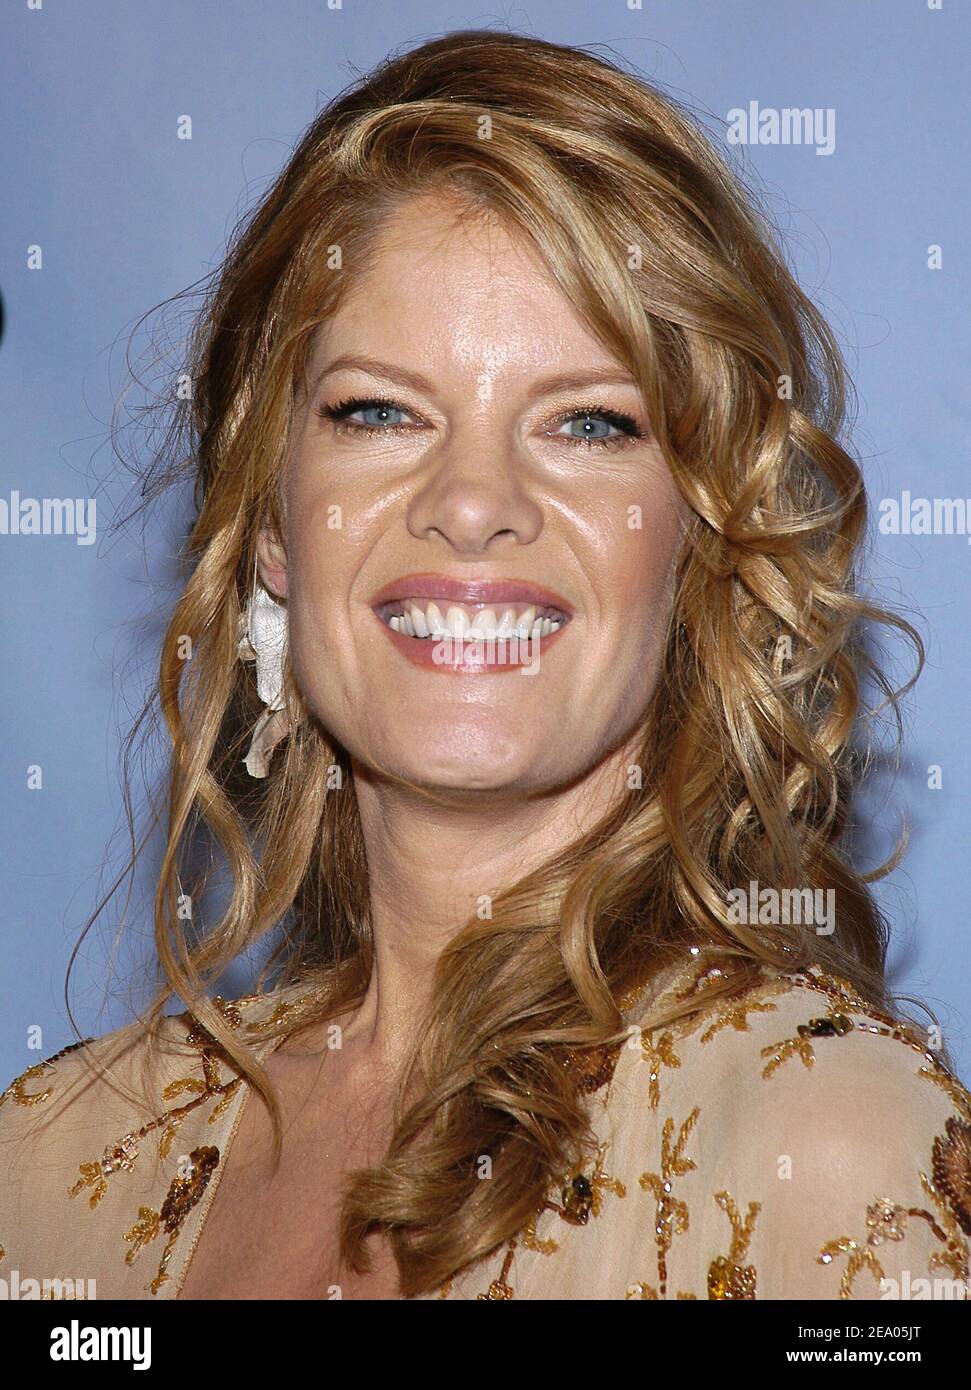 Michelle Stafford, Winner of Outstanding Lead Actress in a Drama Series for ïThe Young and The Restless' at The 31st Annual Daytime Emmy Awards wich was presented by the National Television Academy, held at Radio City Music Hall in New York City on May 21, 2004. Photo by Slaven Vlasic/ABACA. Stock Photo